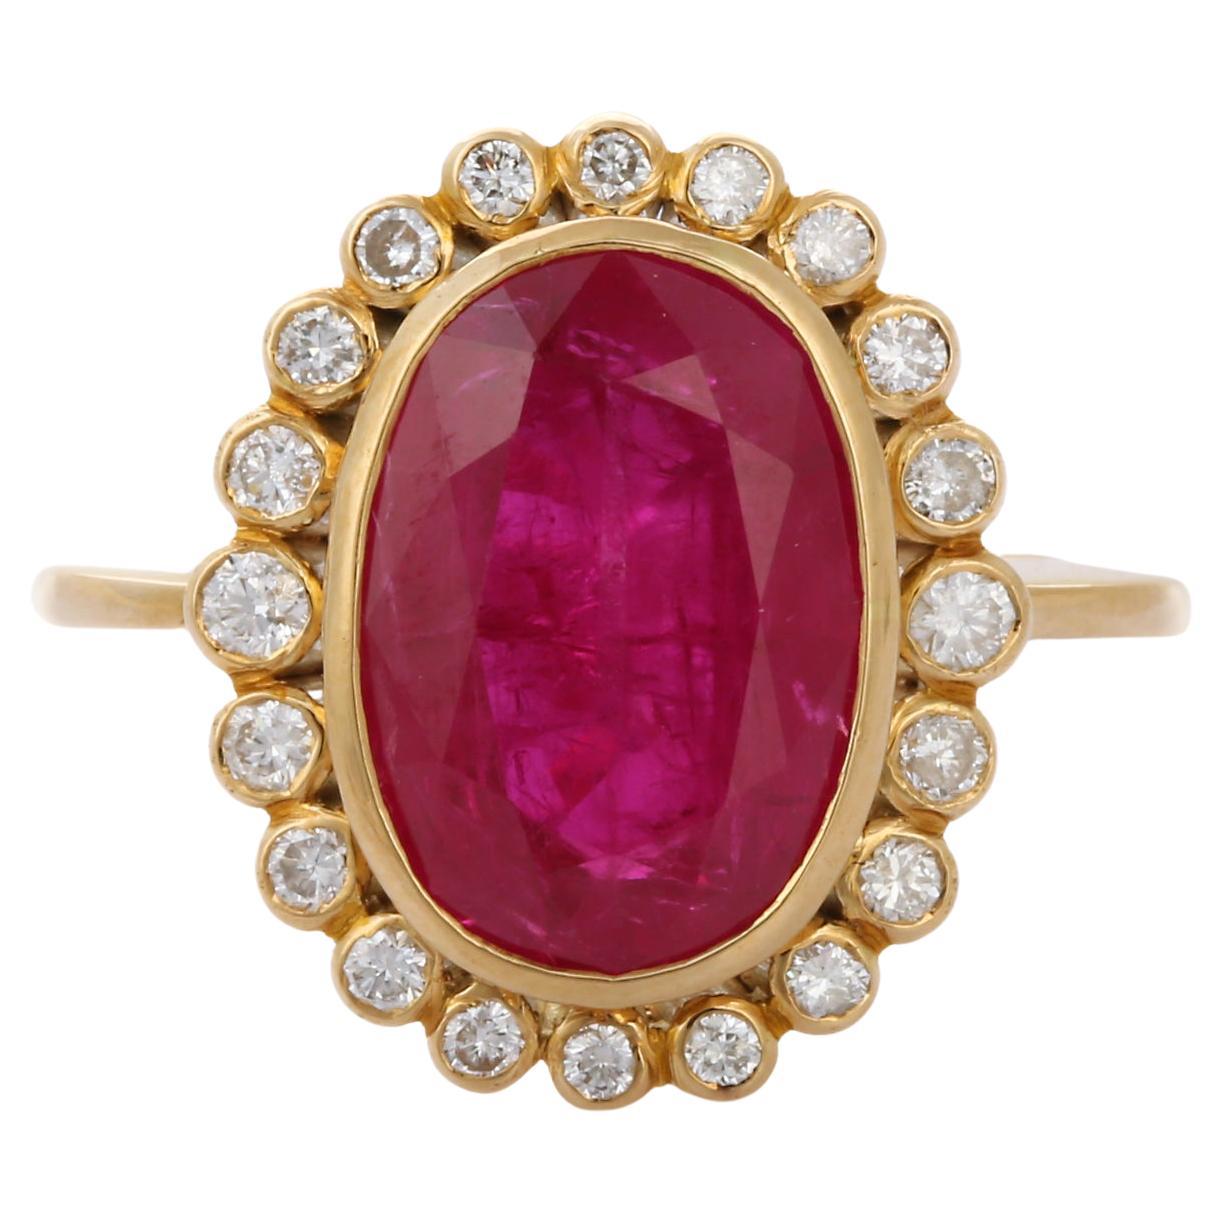 5.8 Carat Ruby Cocktail Ring in 18K Yellow Gold with Diamonds